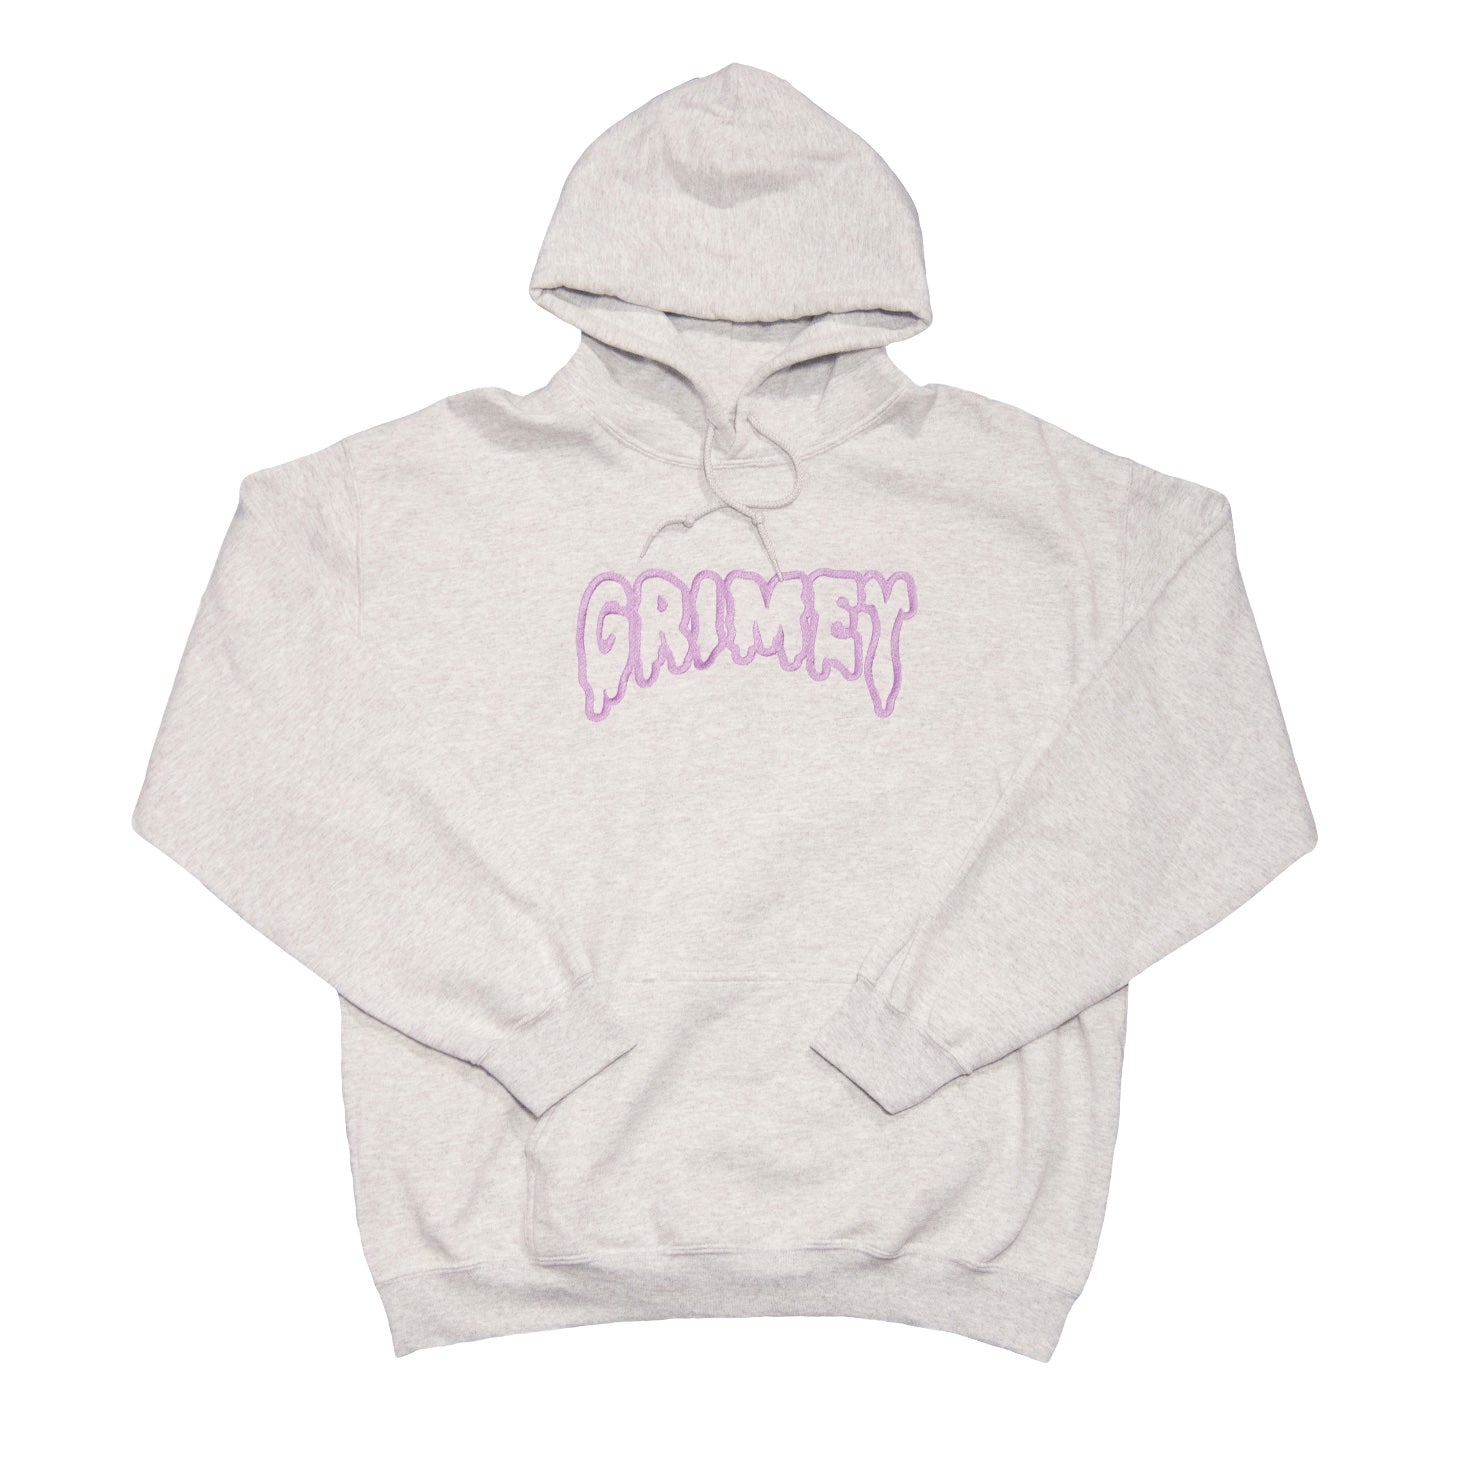 Grimey Embroidered Hoodie